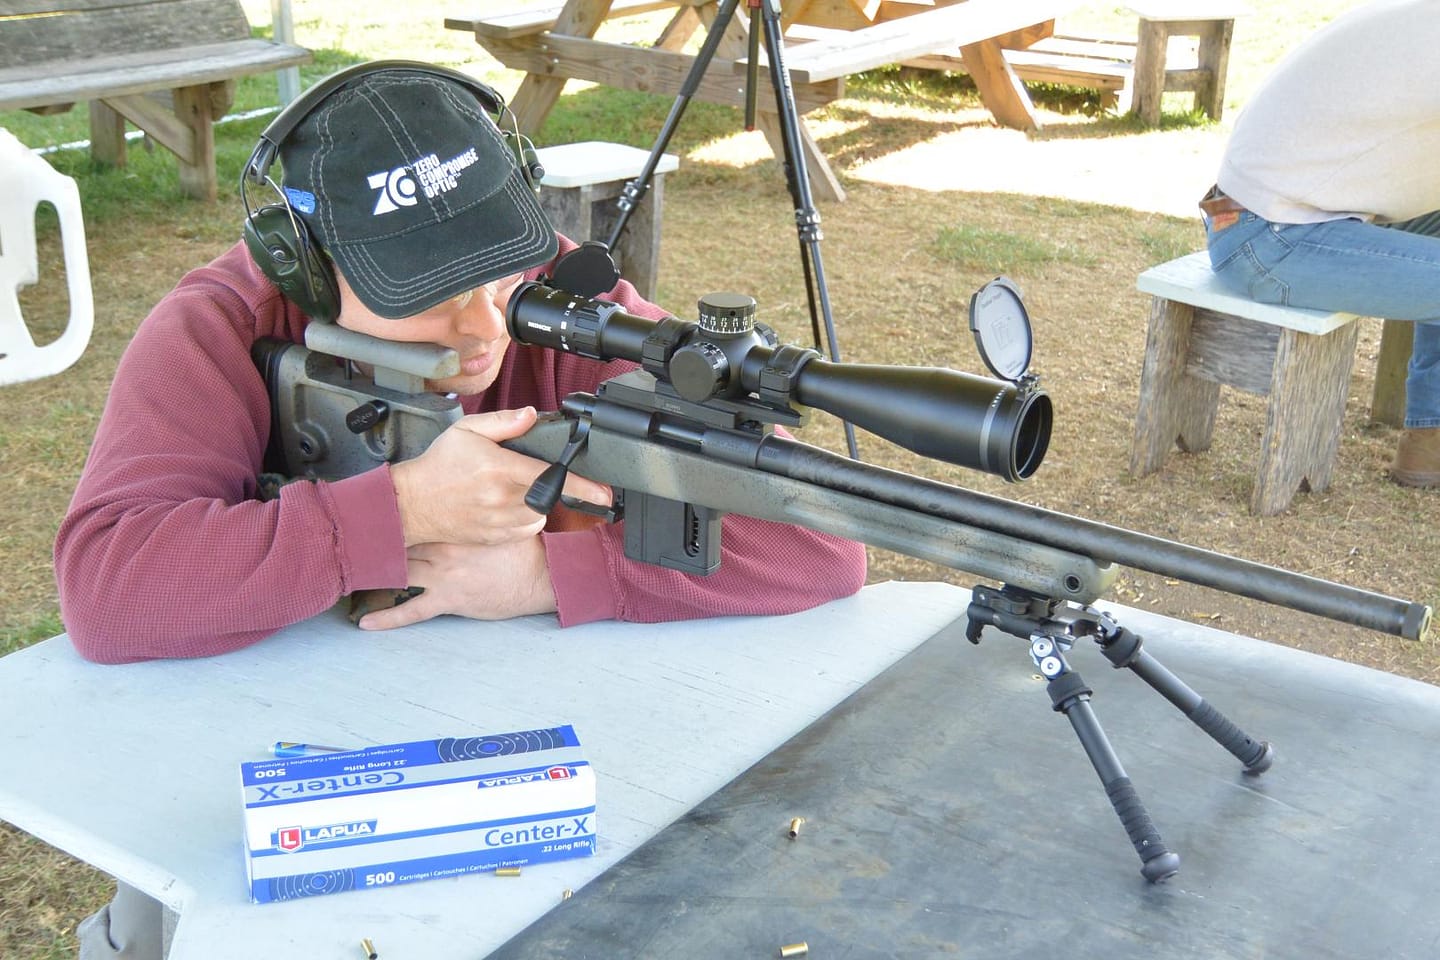 Doing some long range .22lr shooting with the Vudoo V-22, in a Grayboe Phoenix stock